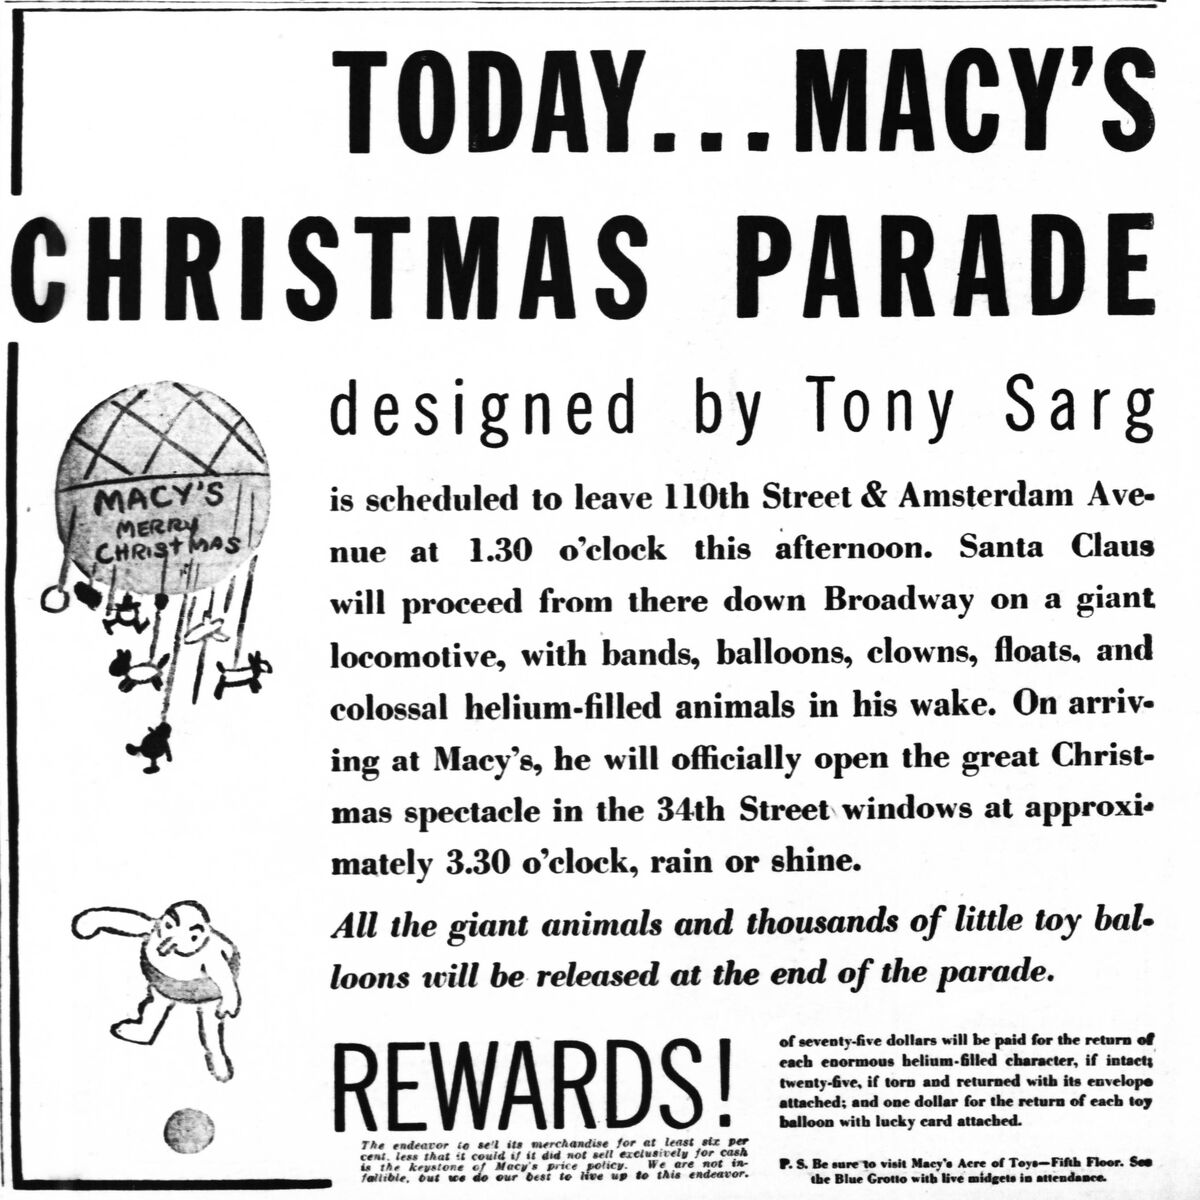 The 9th Annual Macy's Christmas Parade (1932) Macy's Thanksgiving Day